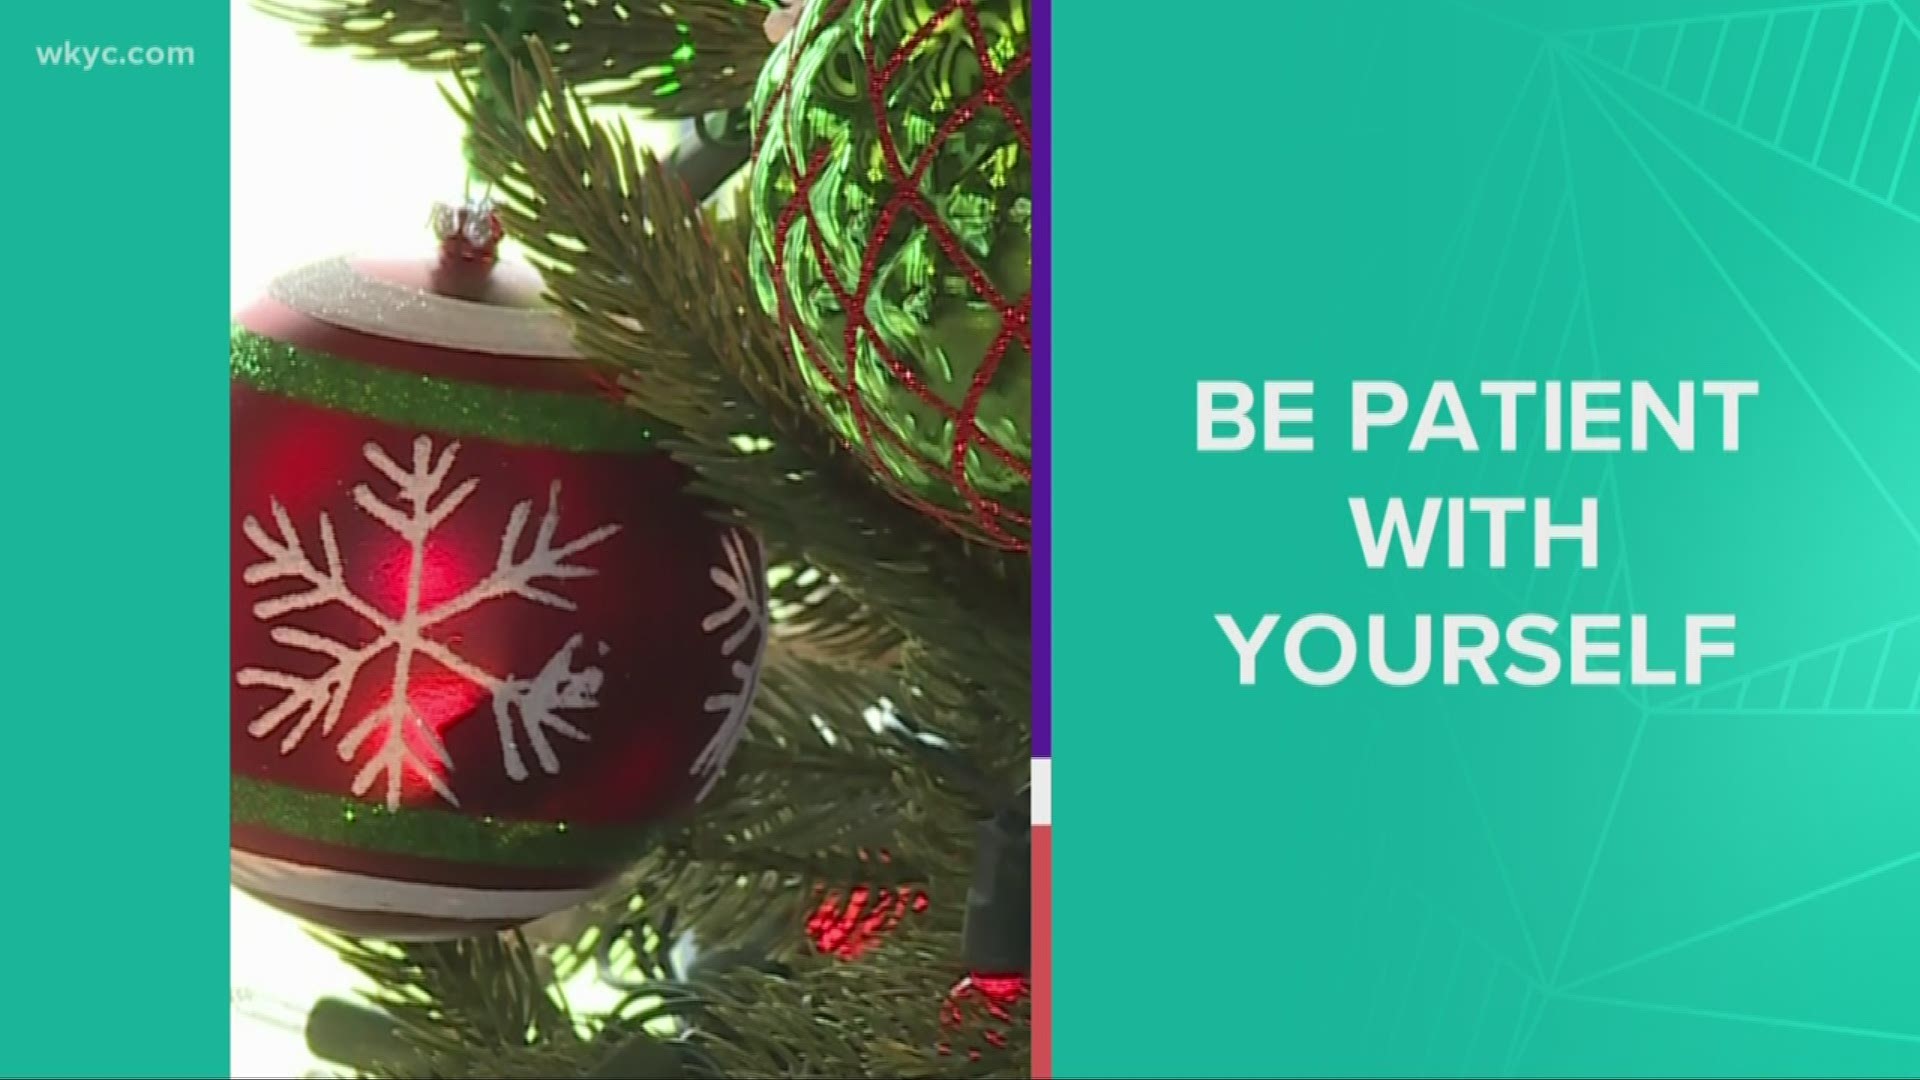 A grief support center is offering tips on how to navigate the holiday season while grieving.